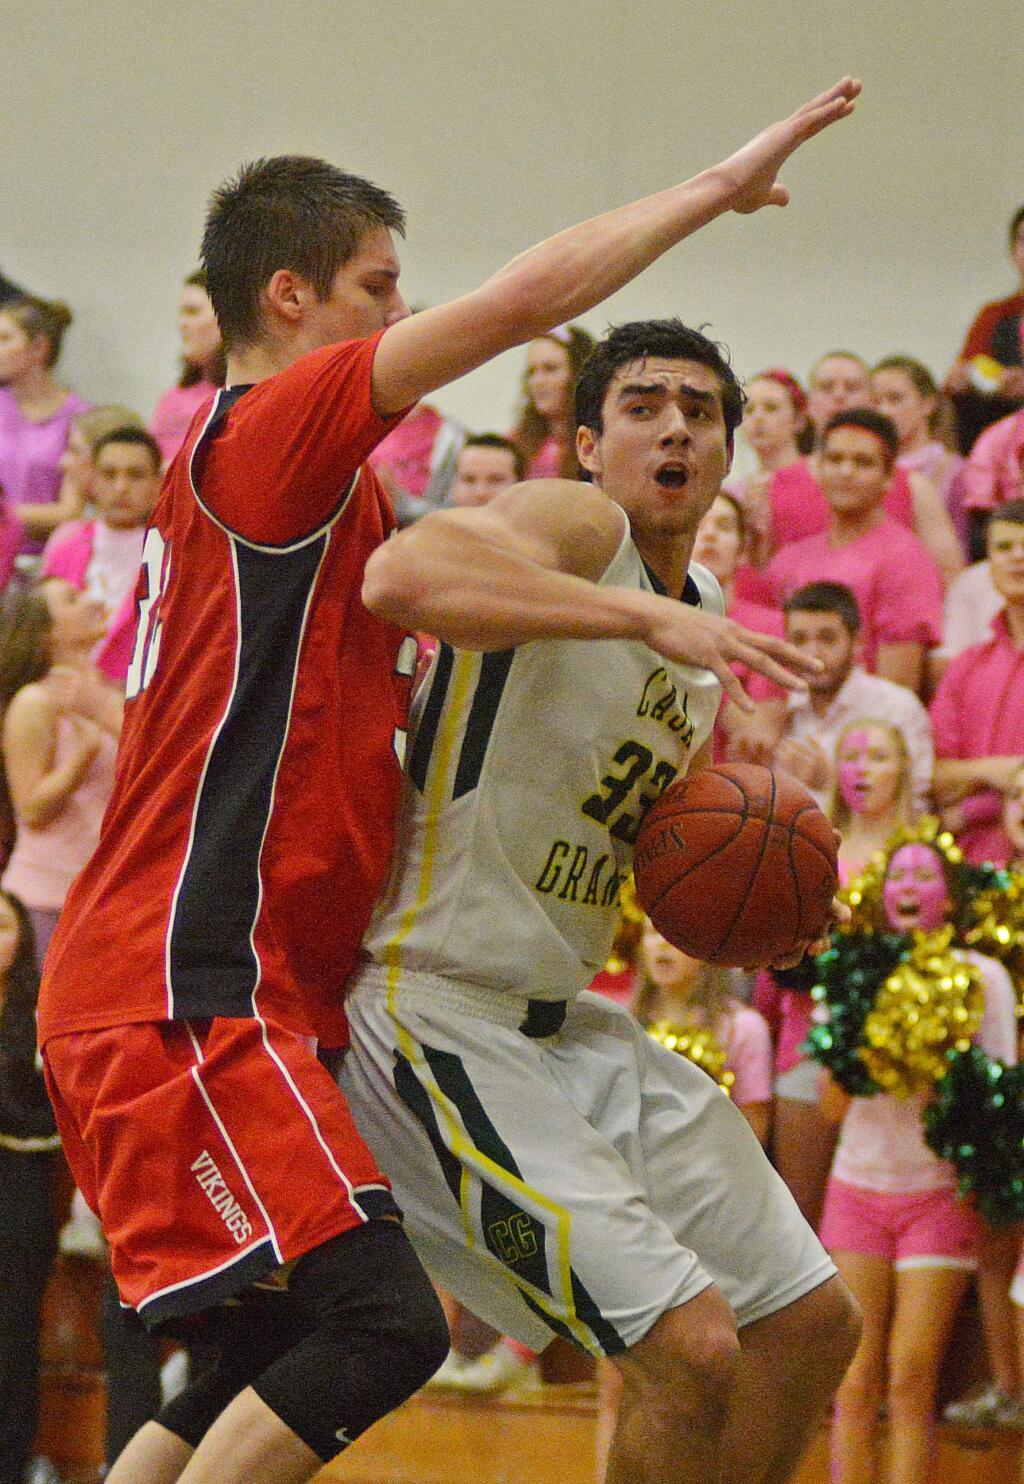 Casa Grande's Jon Christy and Montgomery's Eric Poulson went head-to-head Thursday night on the Casa Grande court. Christy scored 27 points, Poulson 25 points. Casa Grande won, 55-44.